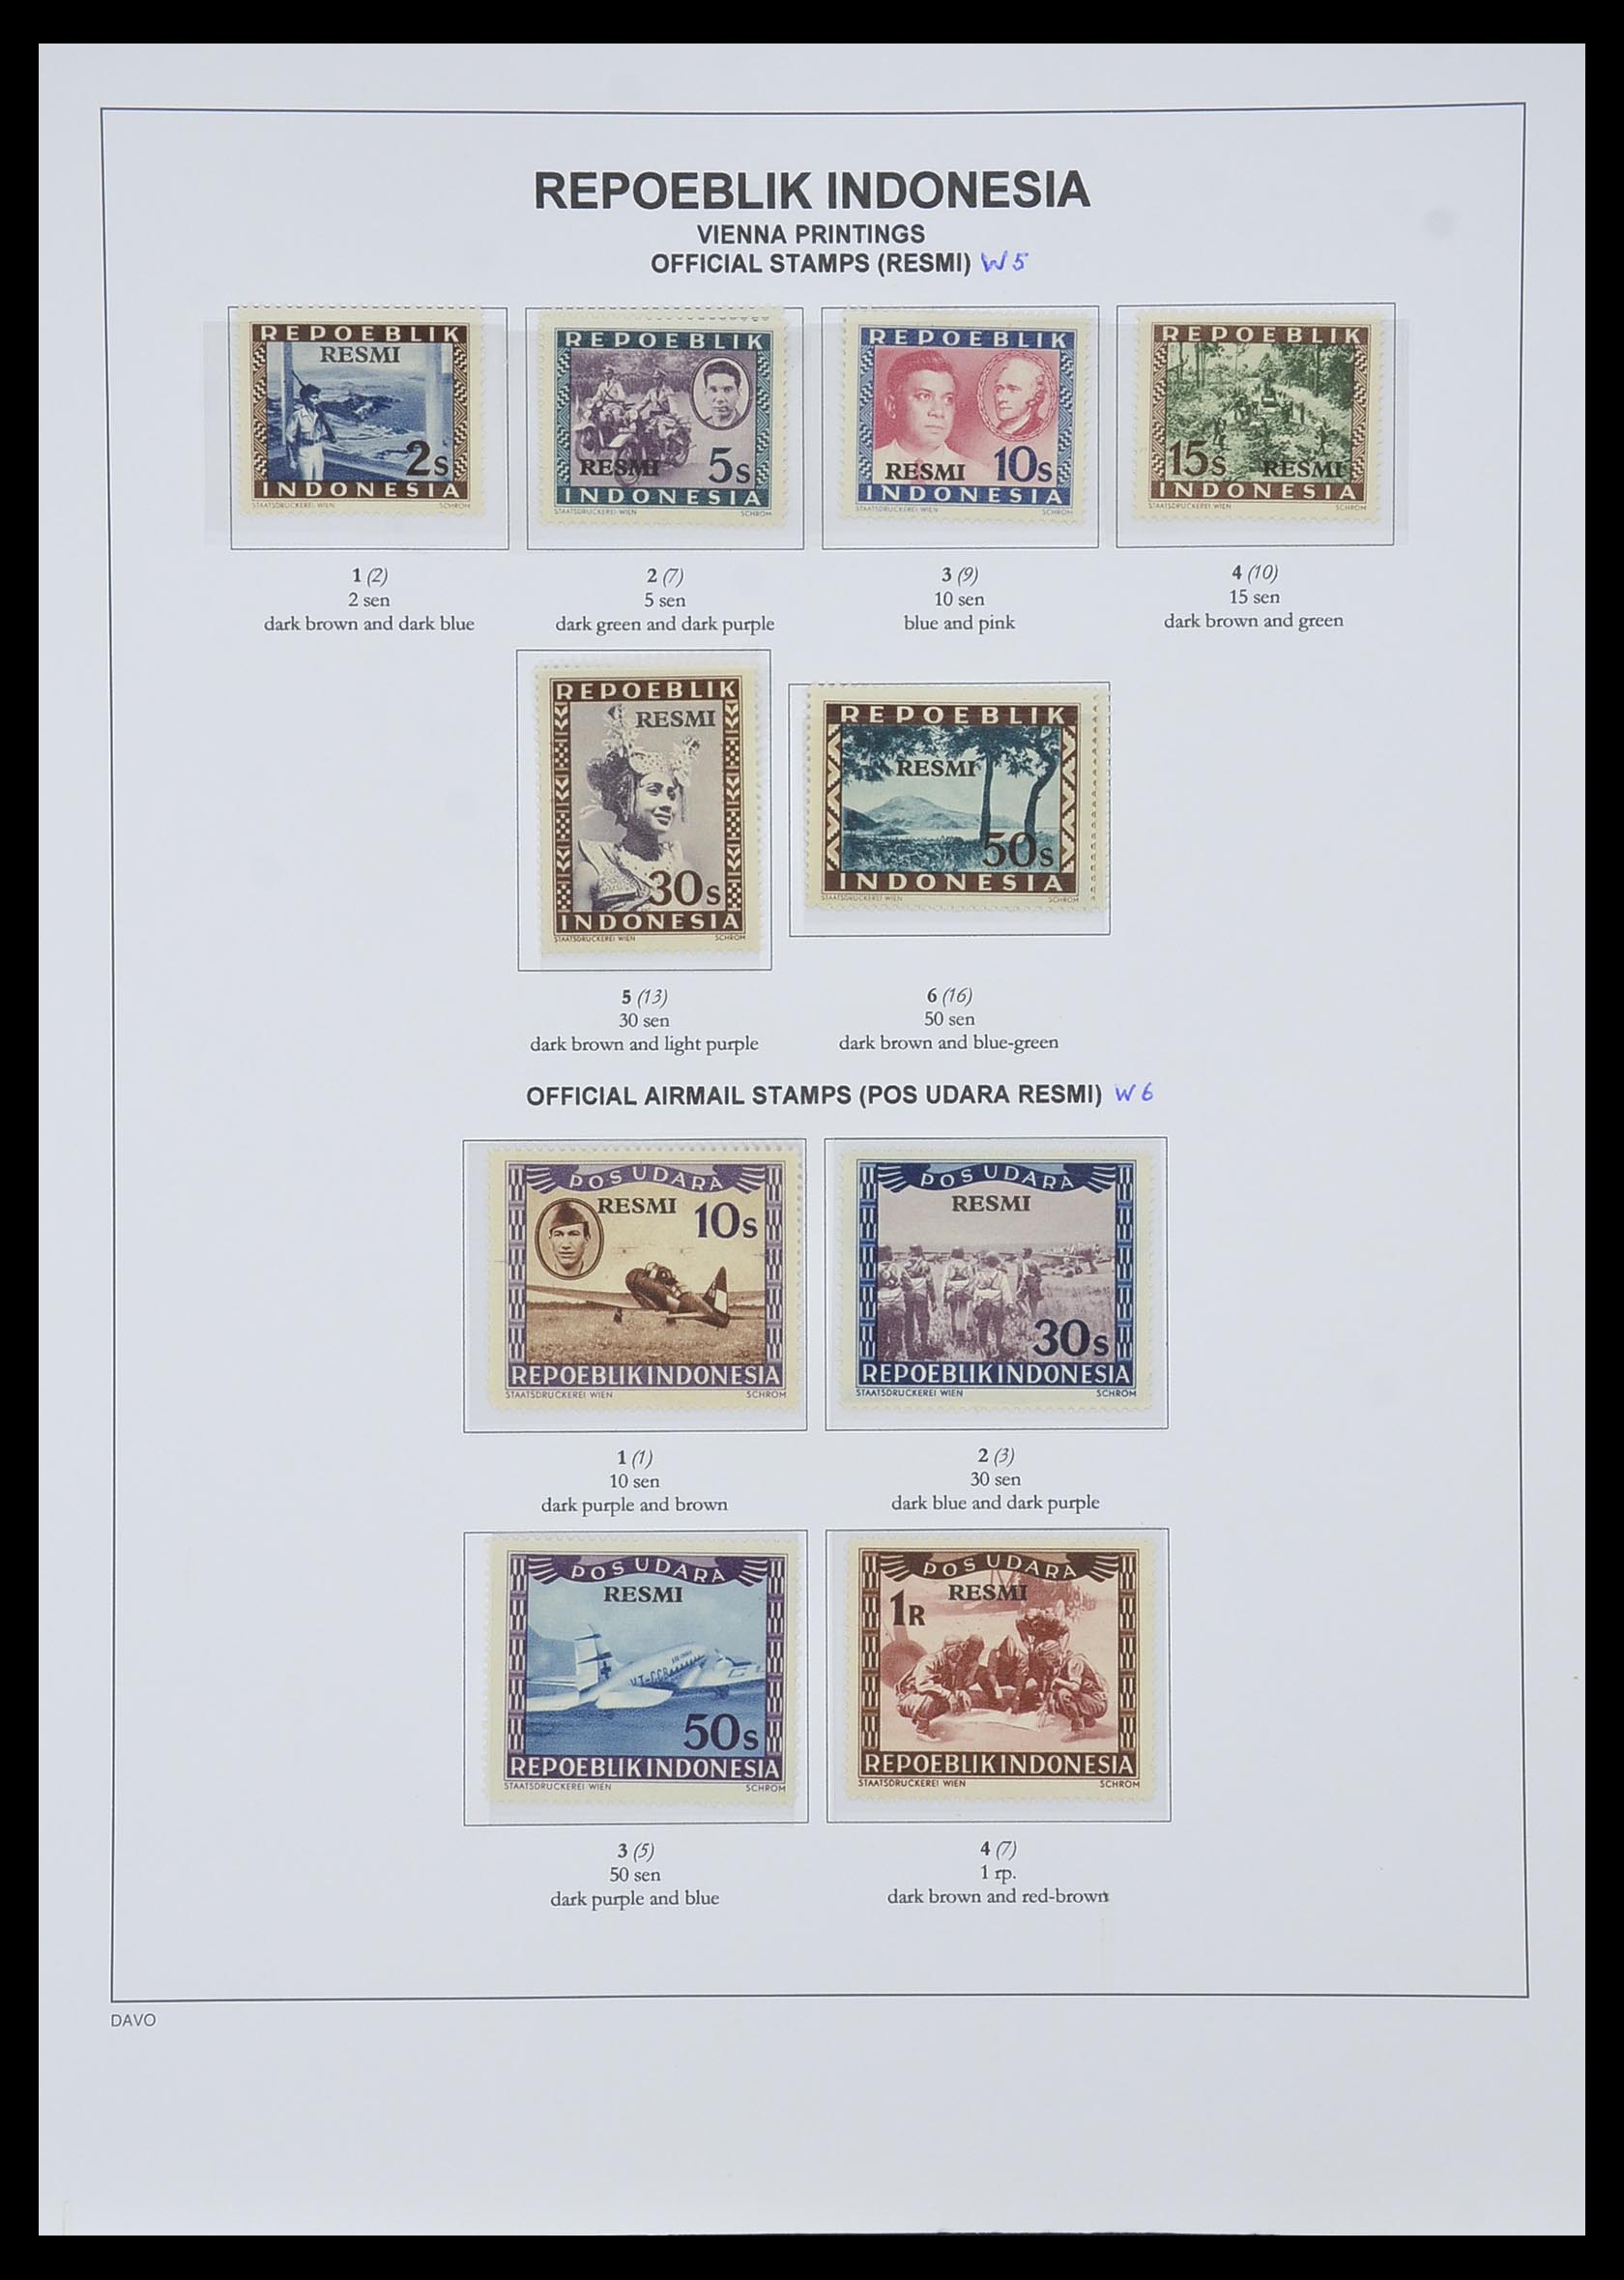 33988 014 - Stamp collection 33988 Vienna printings Indonesia.